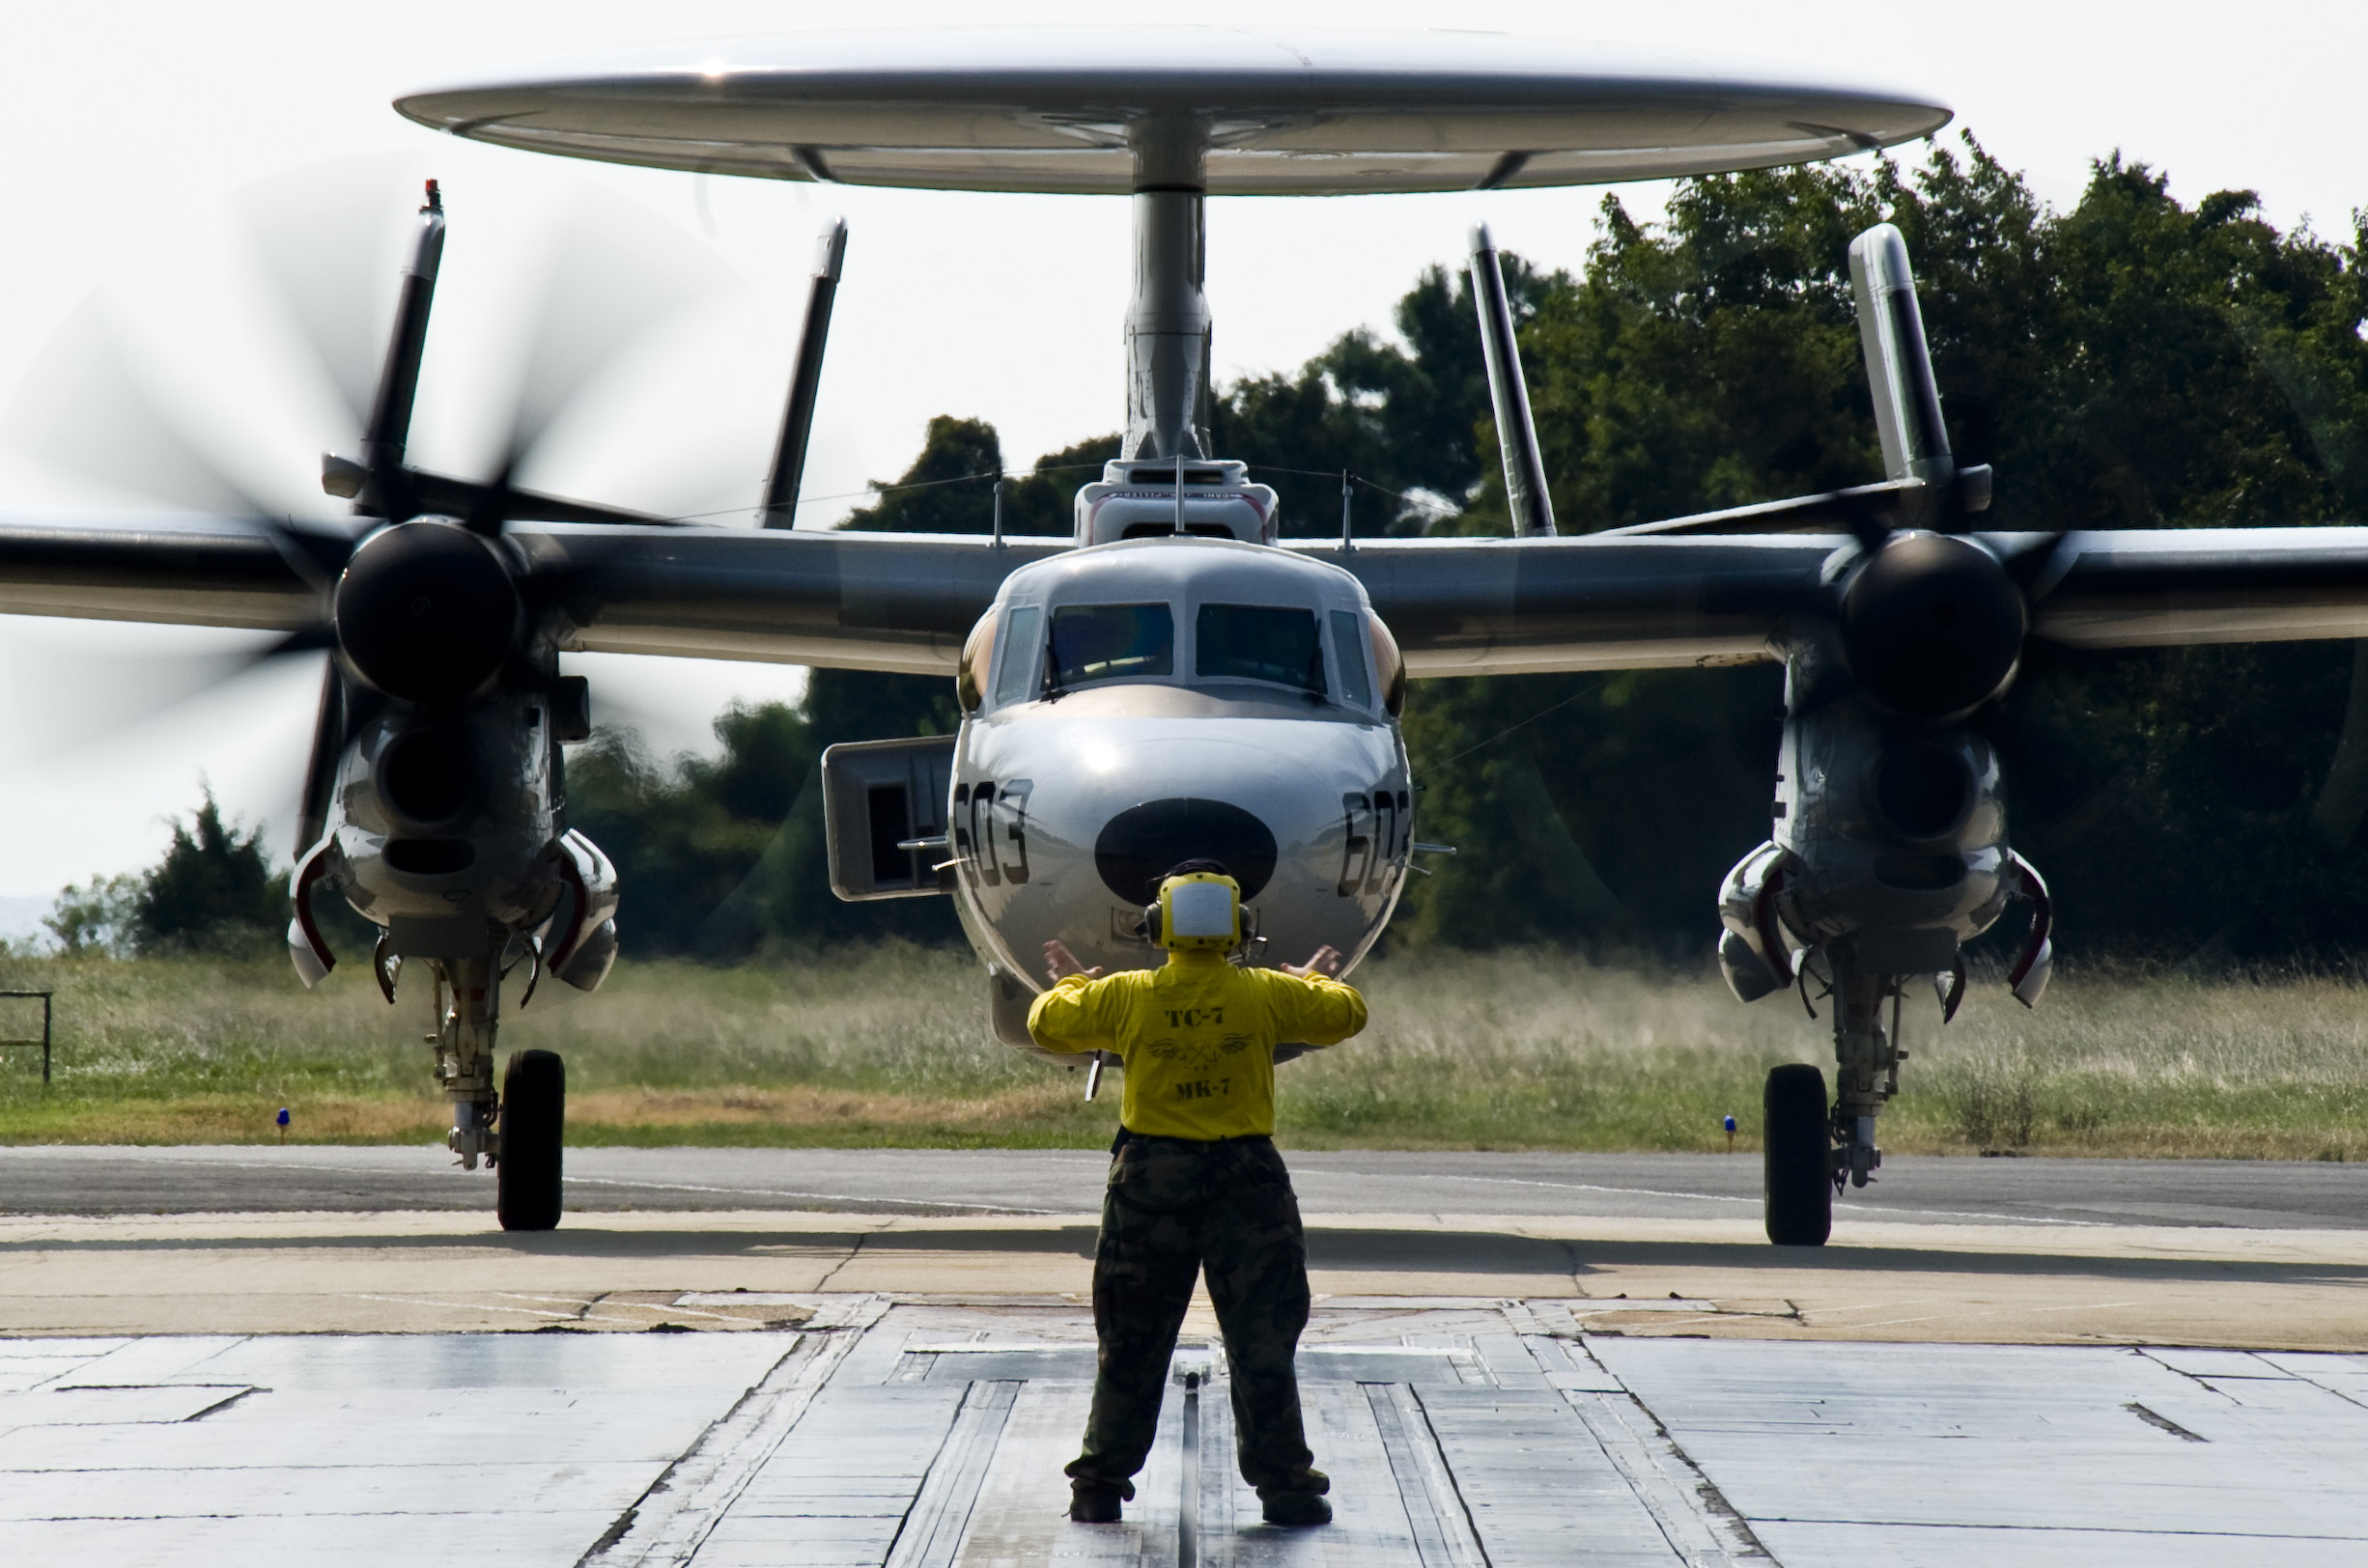 E-2D Hawkeye from the Pioneers of Air Test and Evaluation Squadron (VX) 1 on Aug. 27, 2013. US Navy Photo